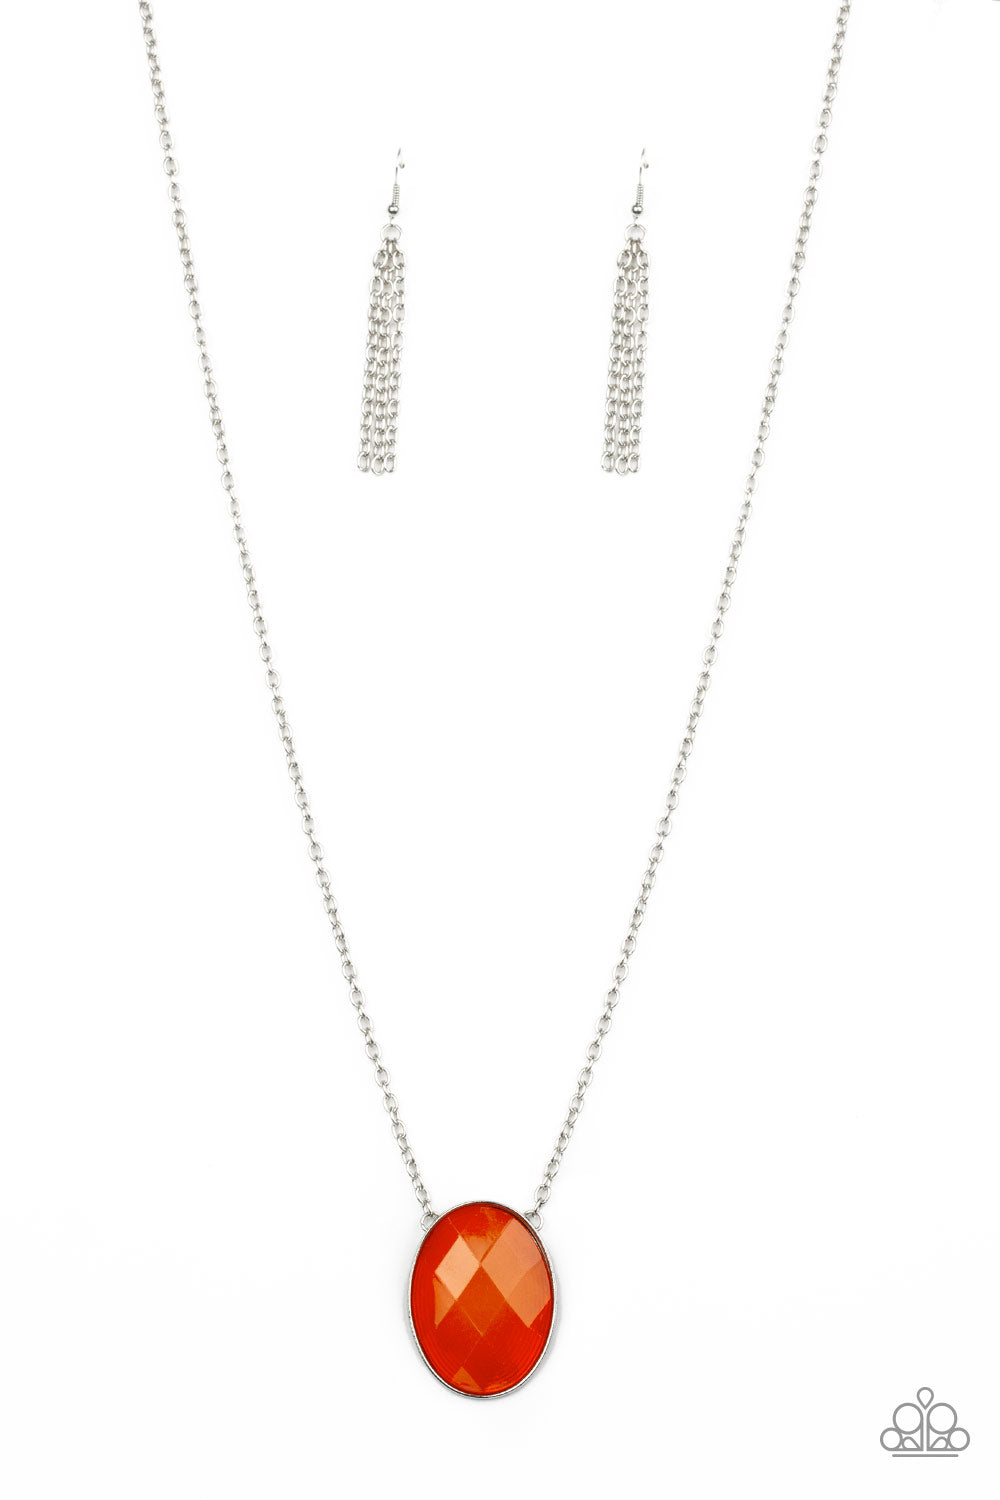 Paparazzi Accessories - Intensely Illuminated - Orange Necklace - Alies Bling Bar